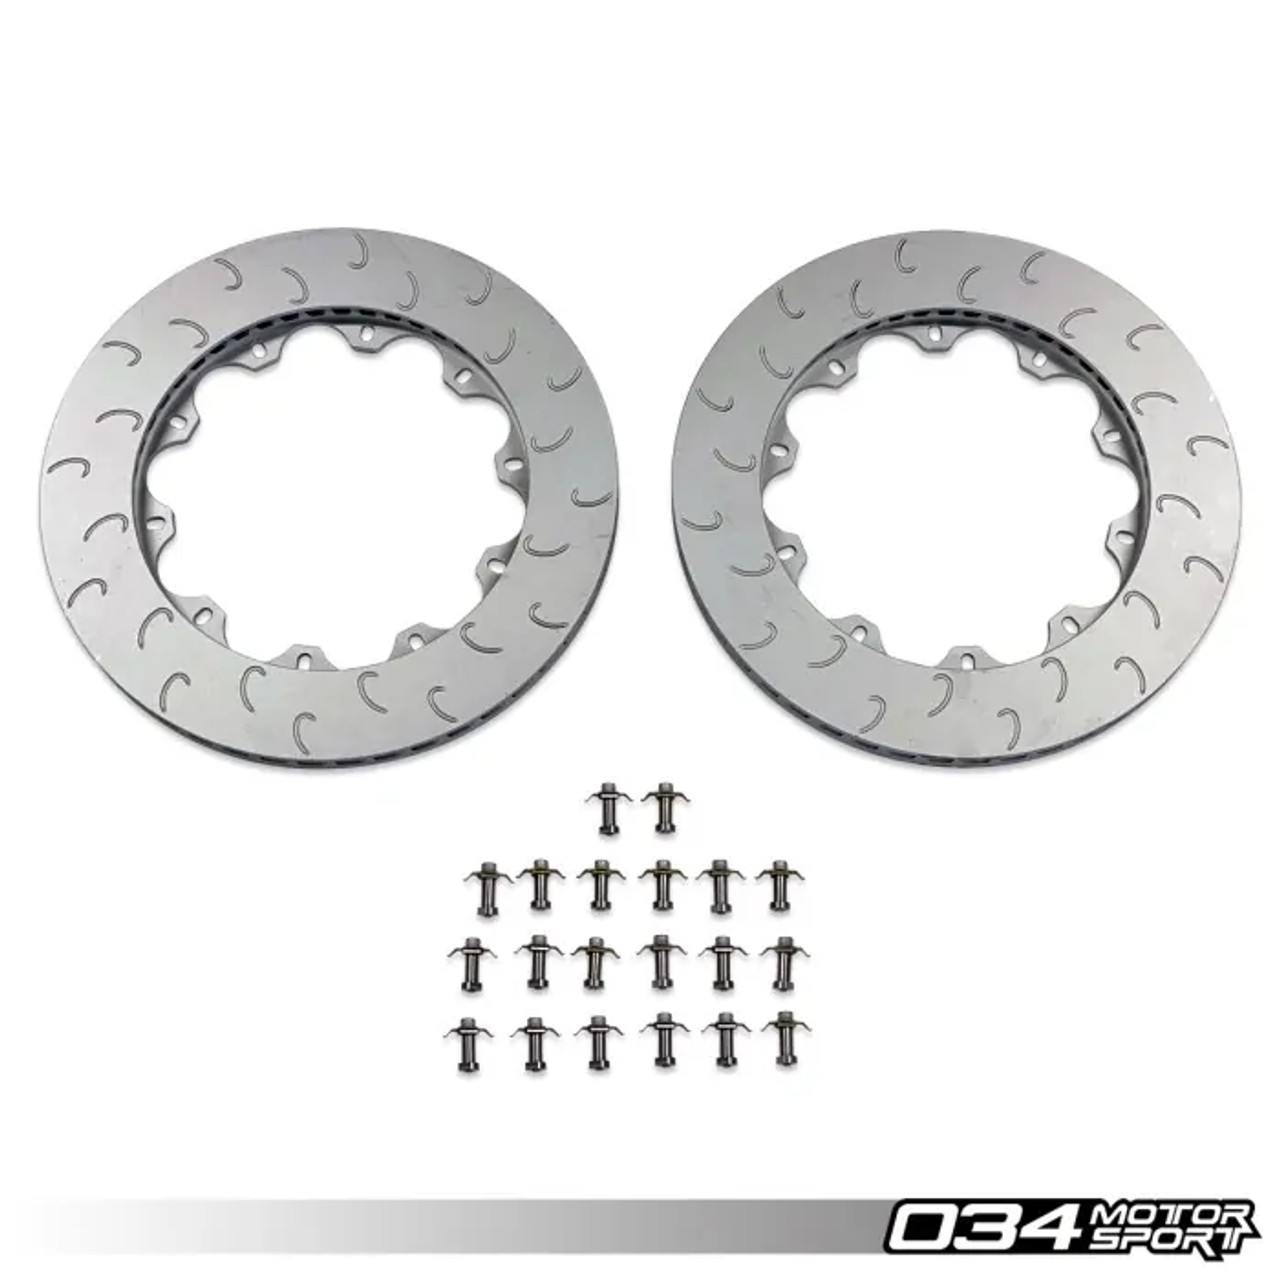 034Motorsport Replacement Front Rotor Ring Set for MK8 Golf R & 8Y S3